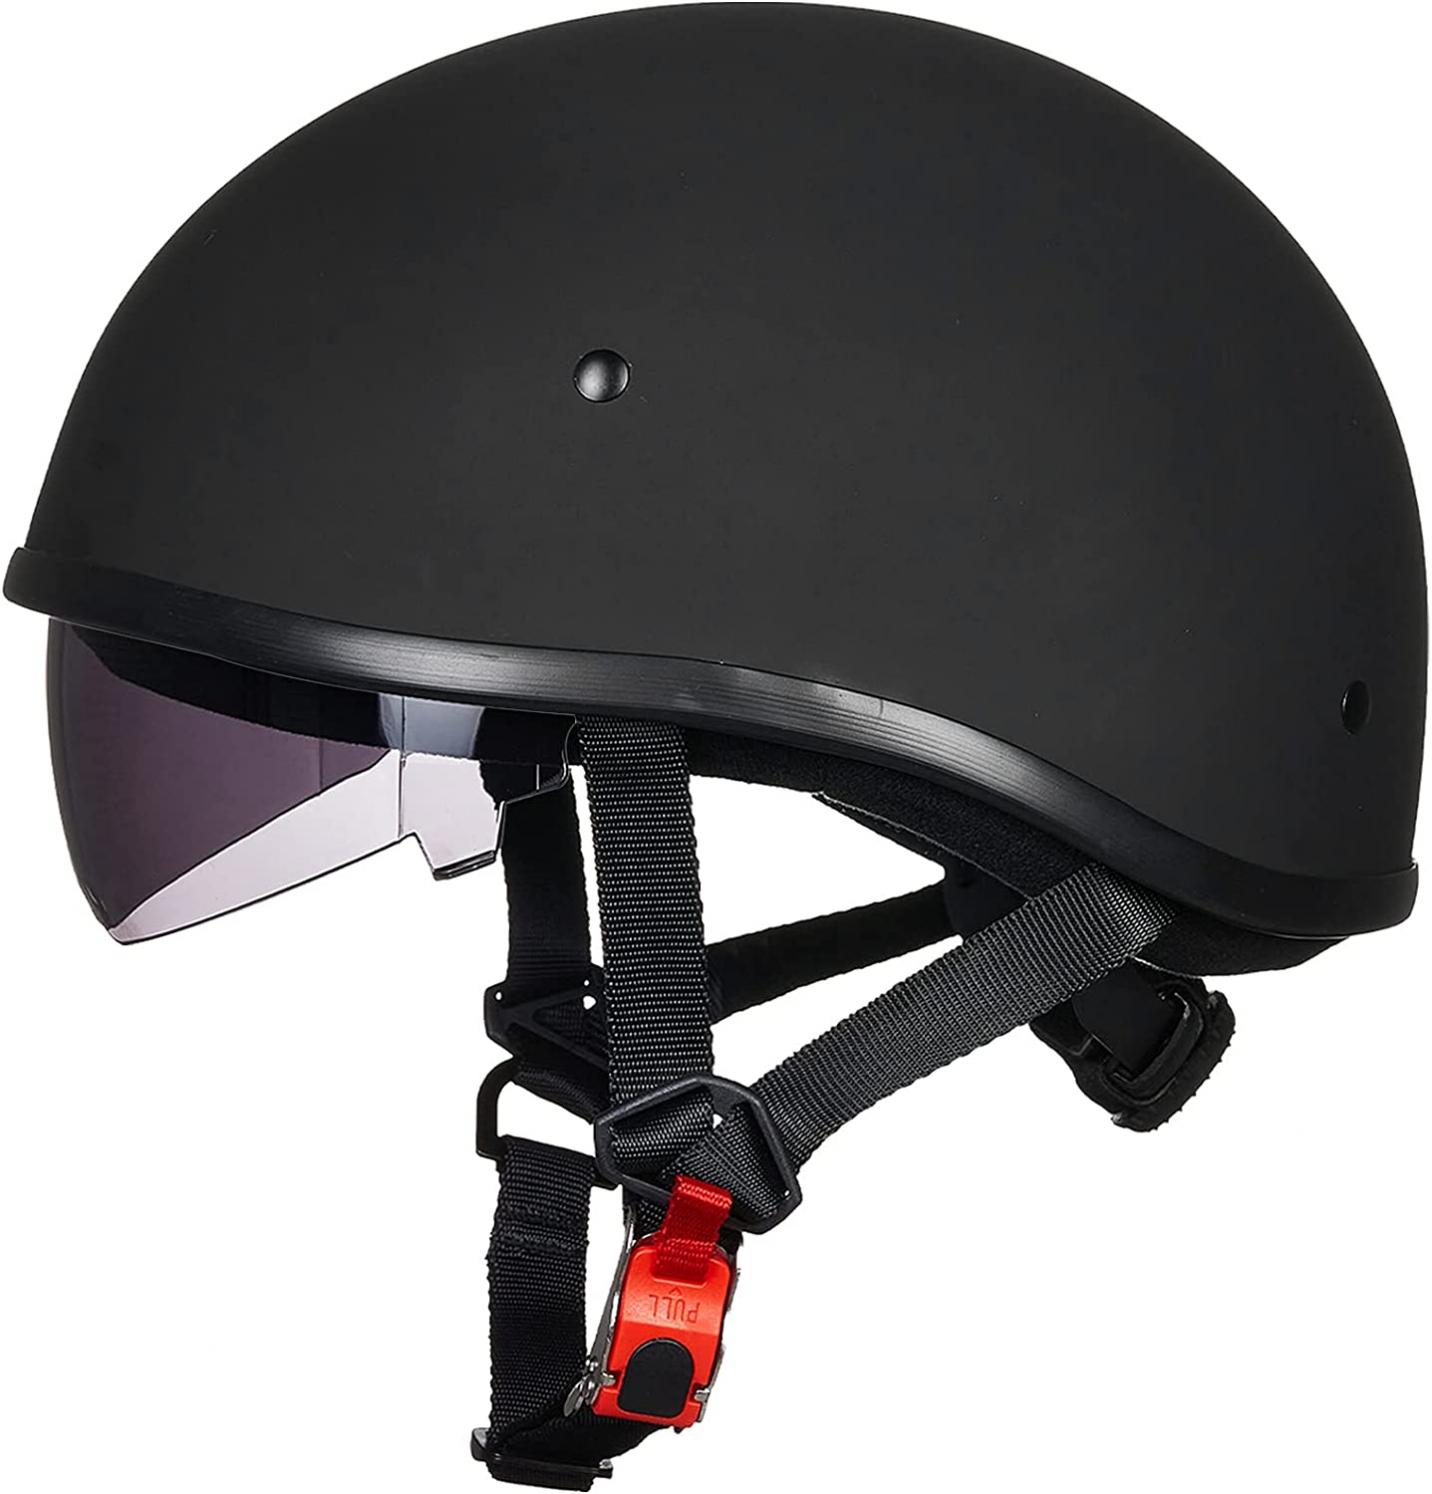 ILM Motorcycle Half Helmet with Sunshield Quick Release Strap Half Face Fit for Cruiser Scooter DOT Approved 883V (Matte Black, Large)